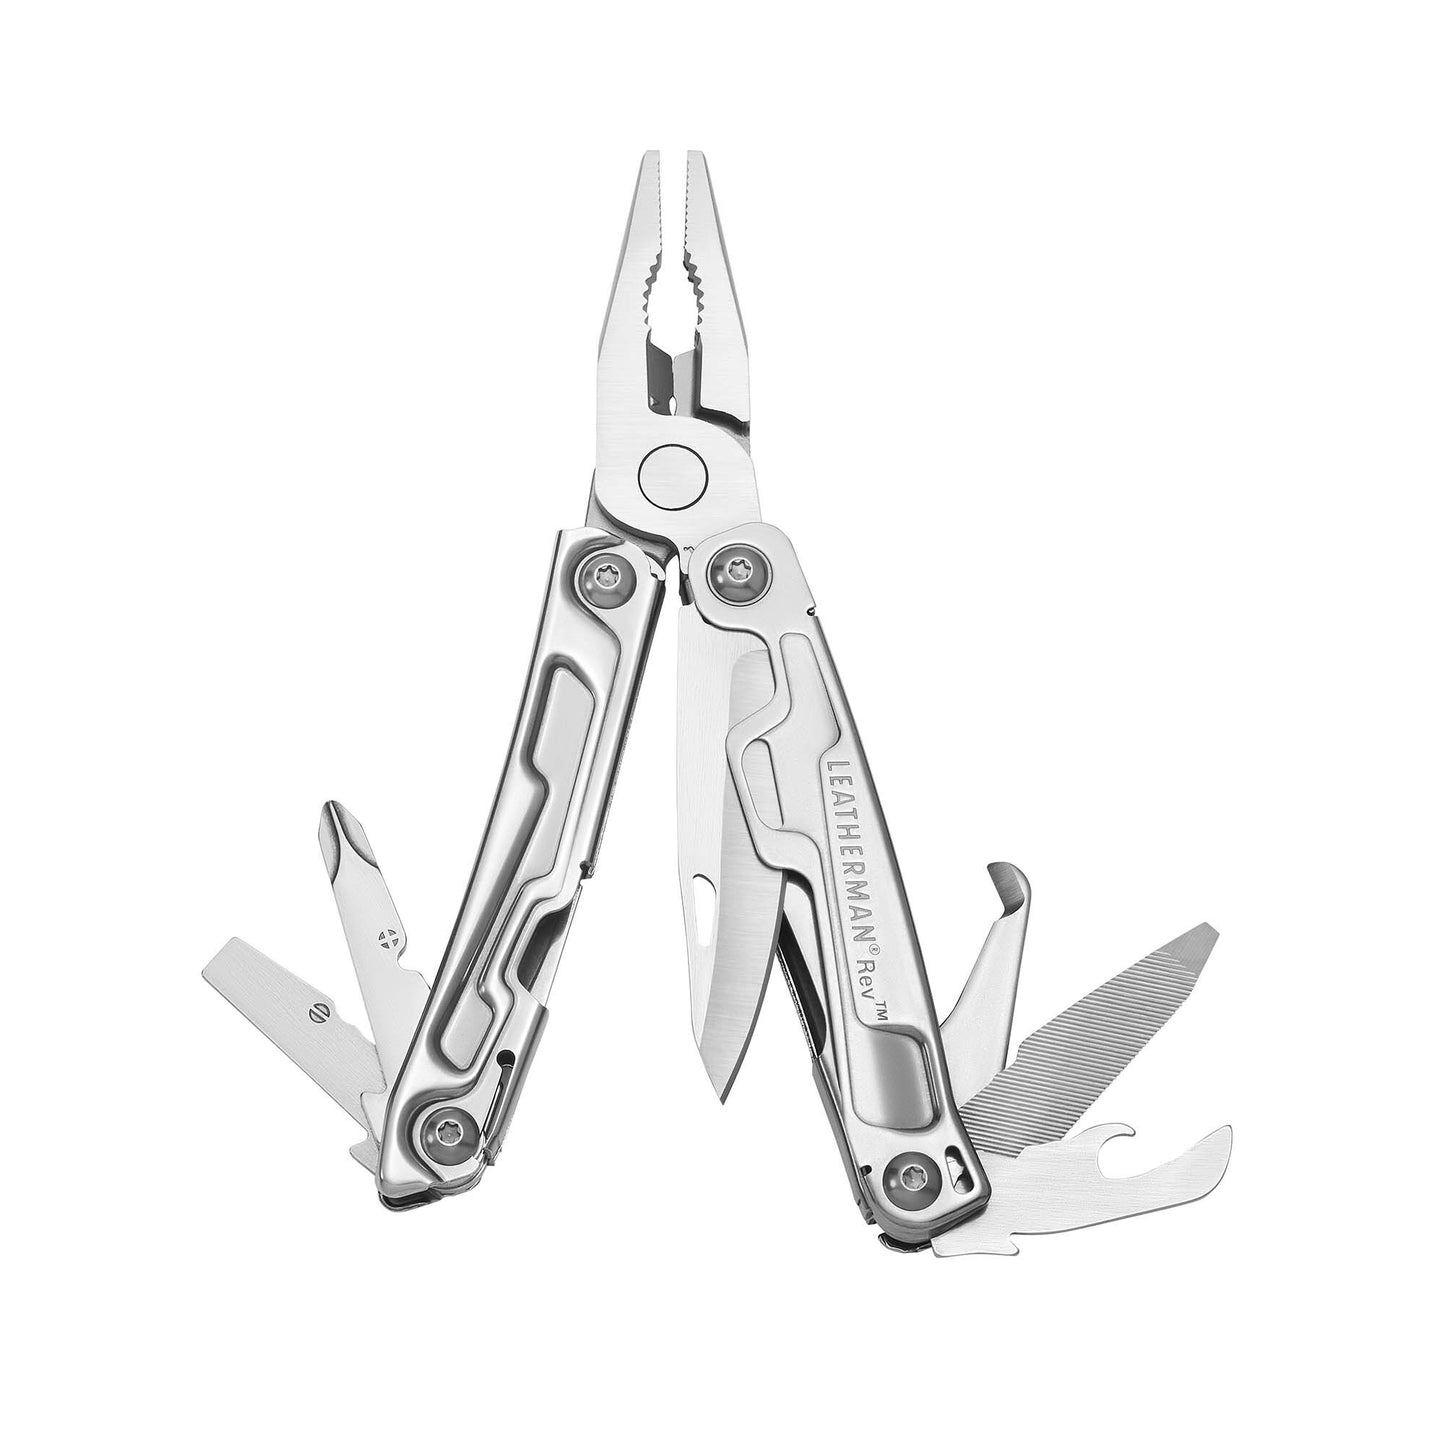 Leatherman REV - No Pouch included